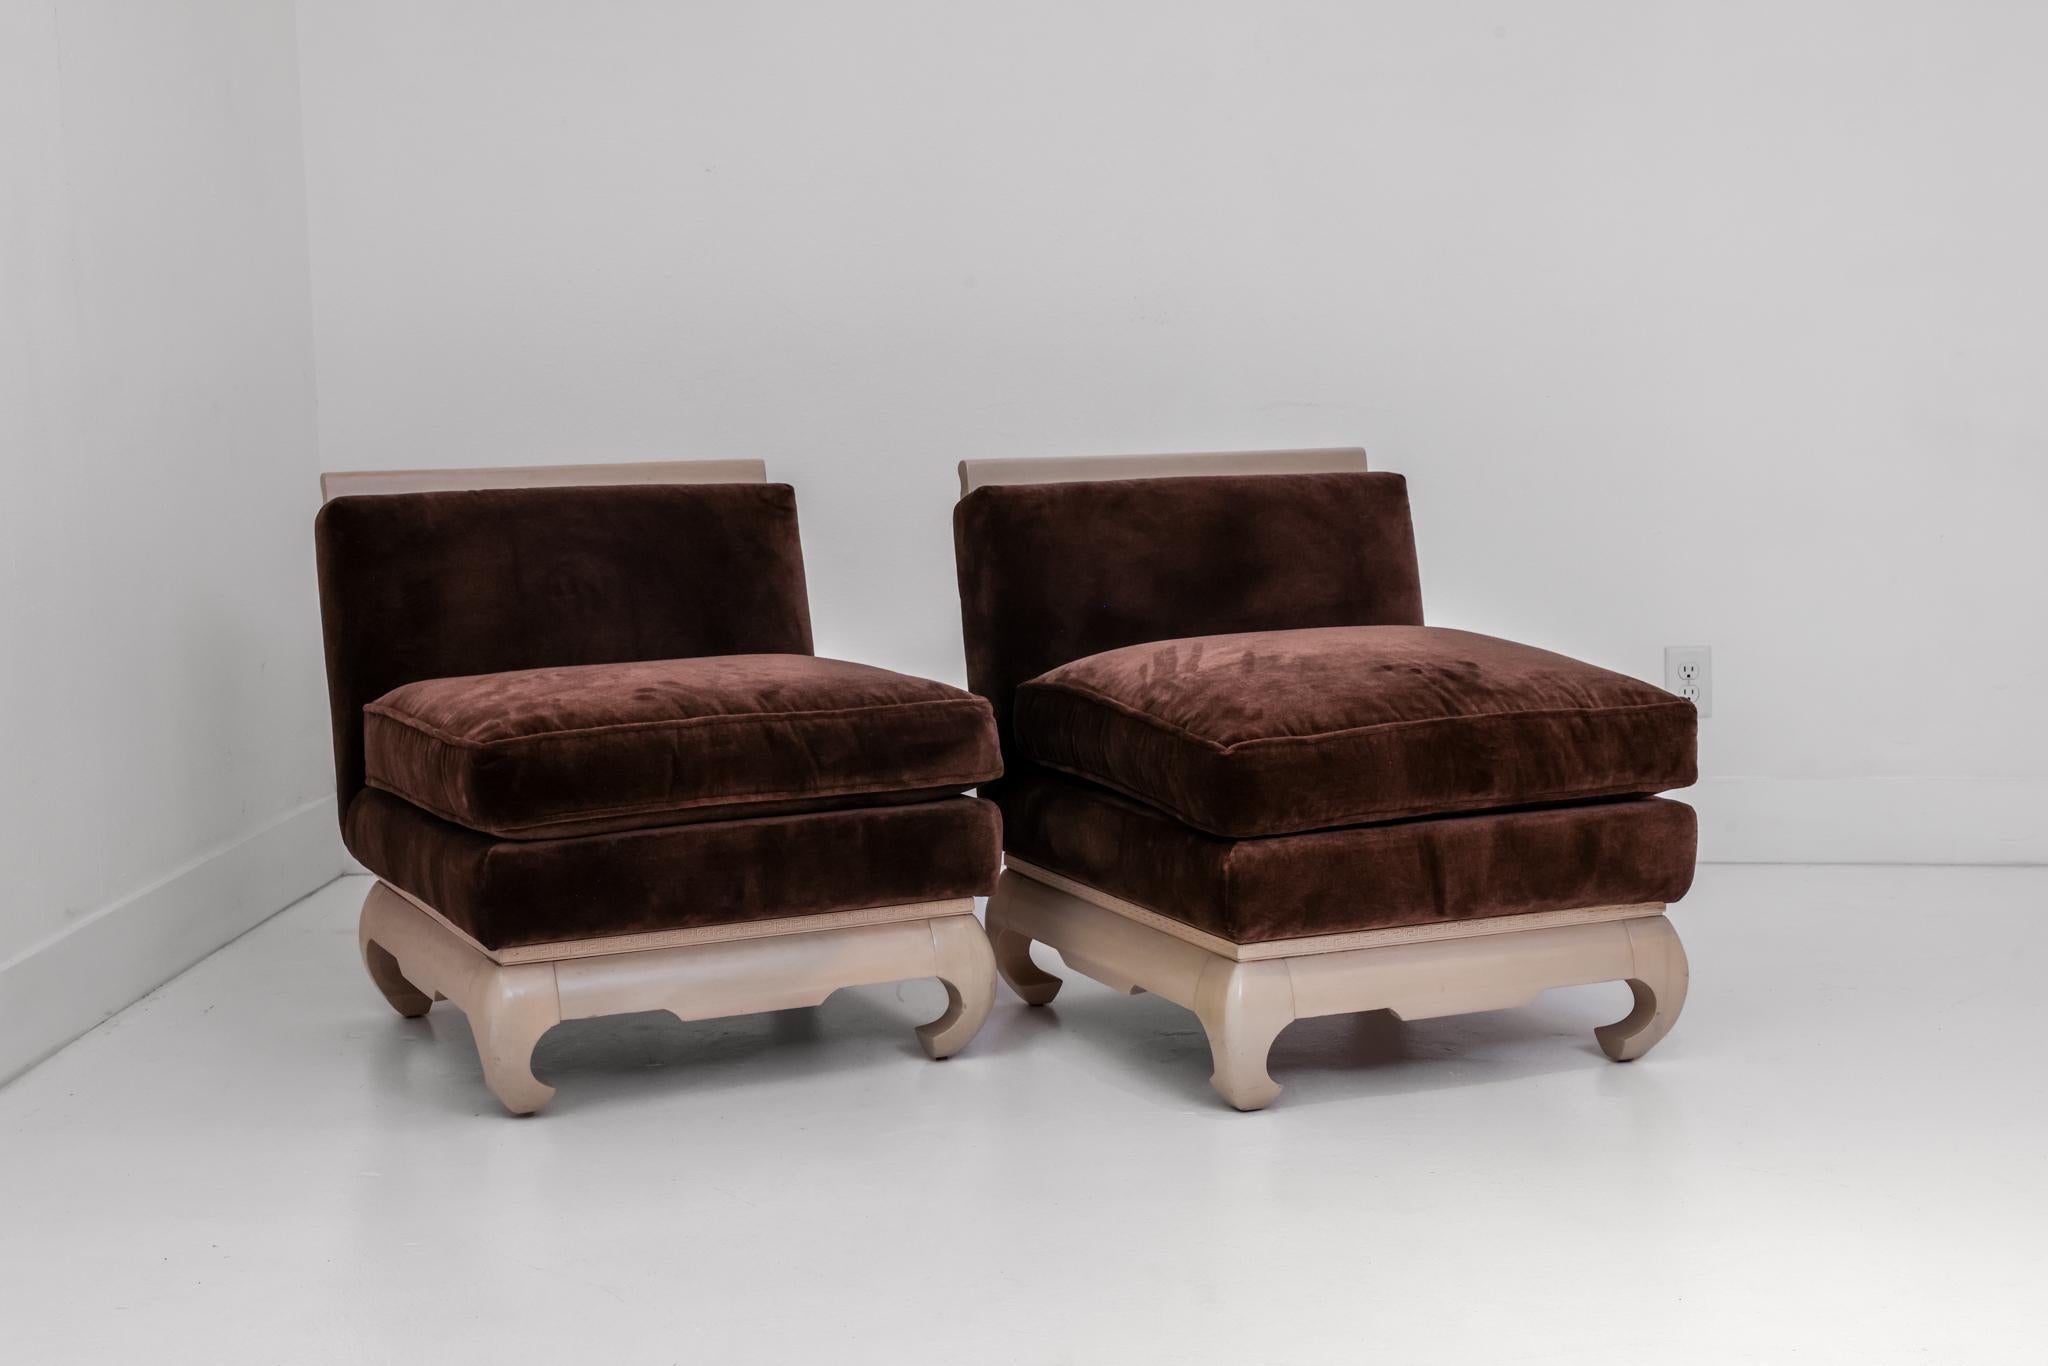 This is an exceptionally well crafted pair of asian inspired slipper chairs, newly upholstered in a cashmere velvet with bleached wood accents. Circa 1940s, these chairs reflect the asian influence seen in design in the U.S. during the midcentury